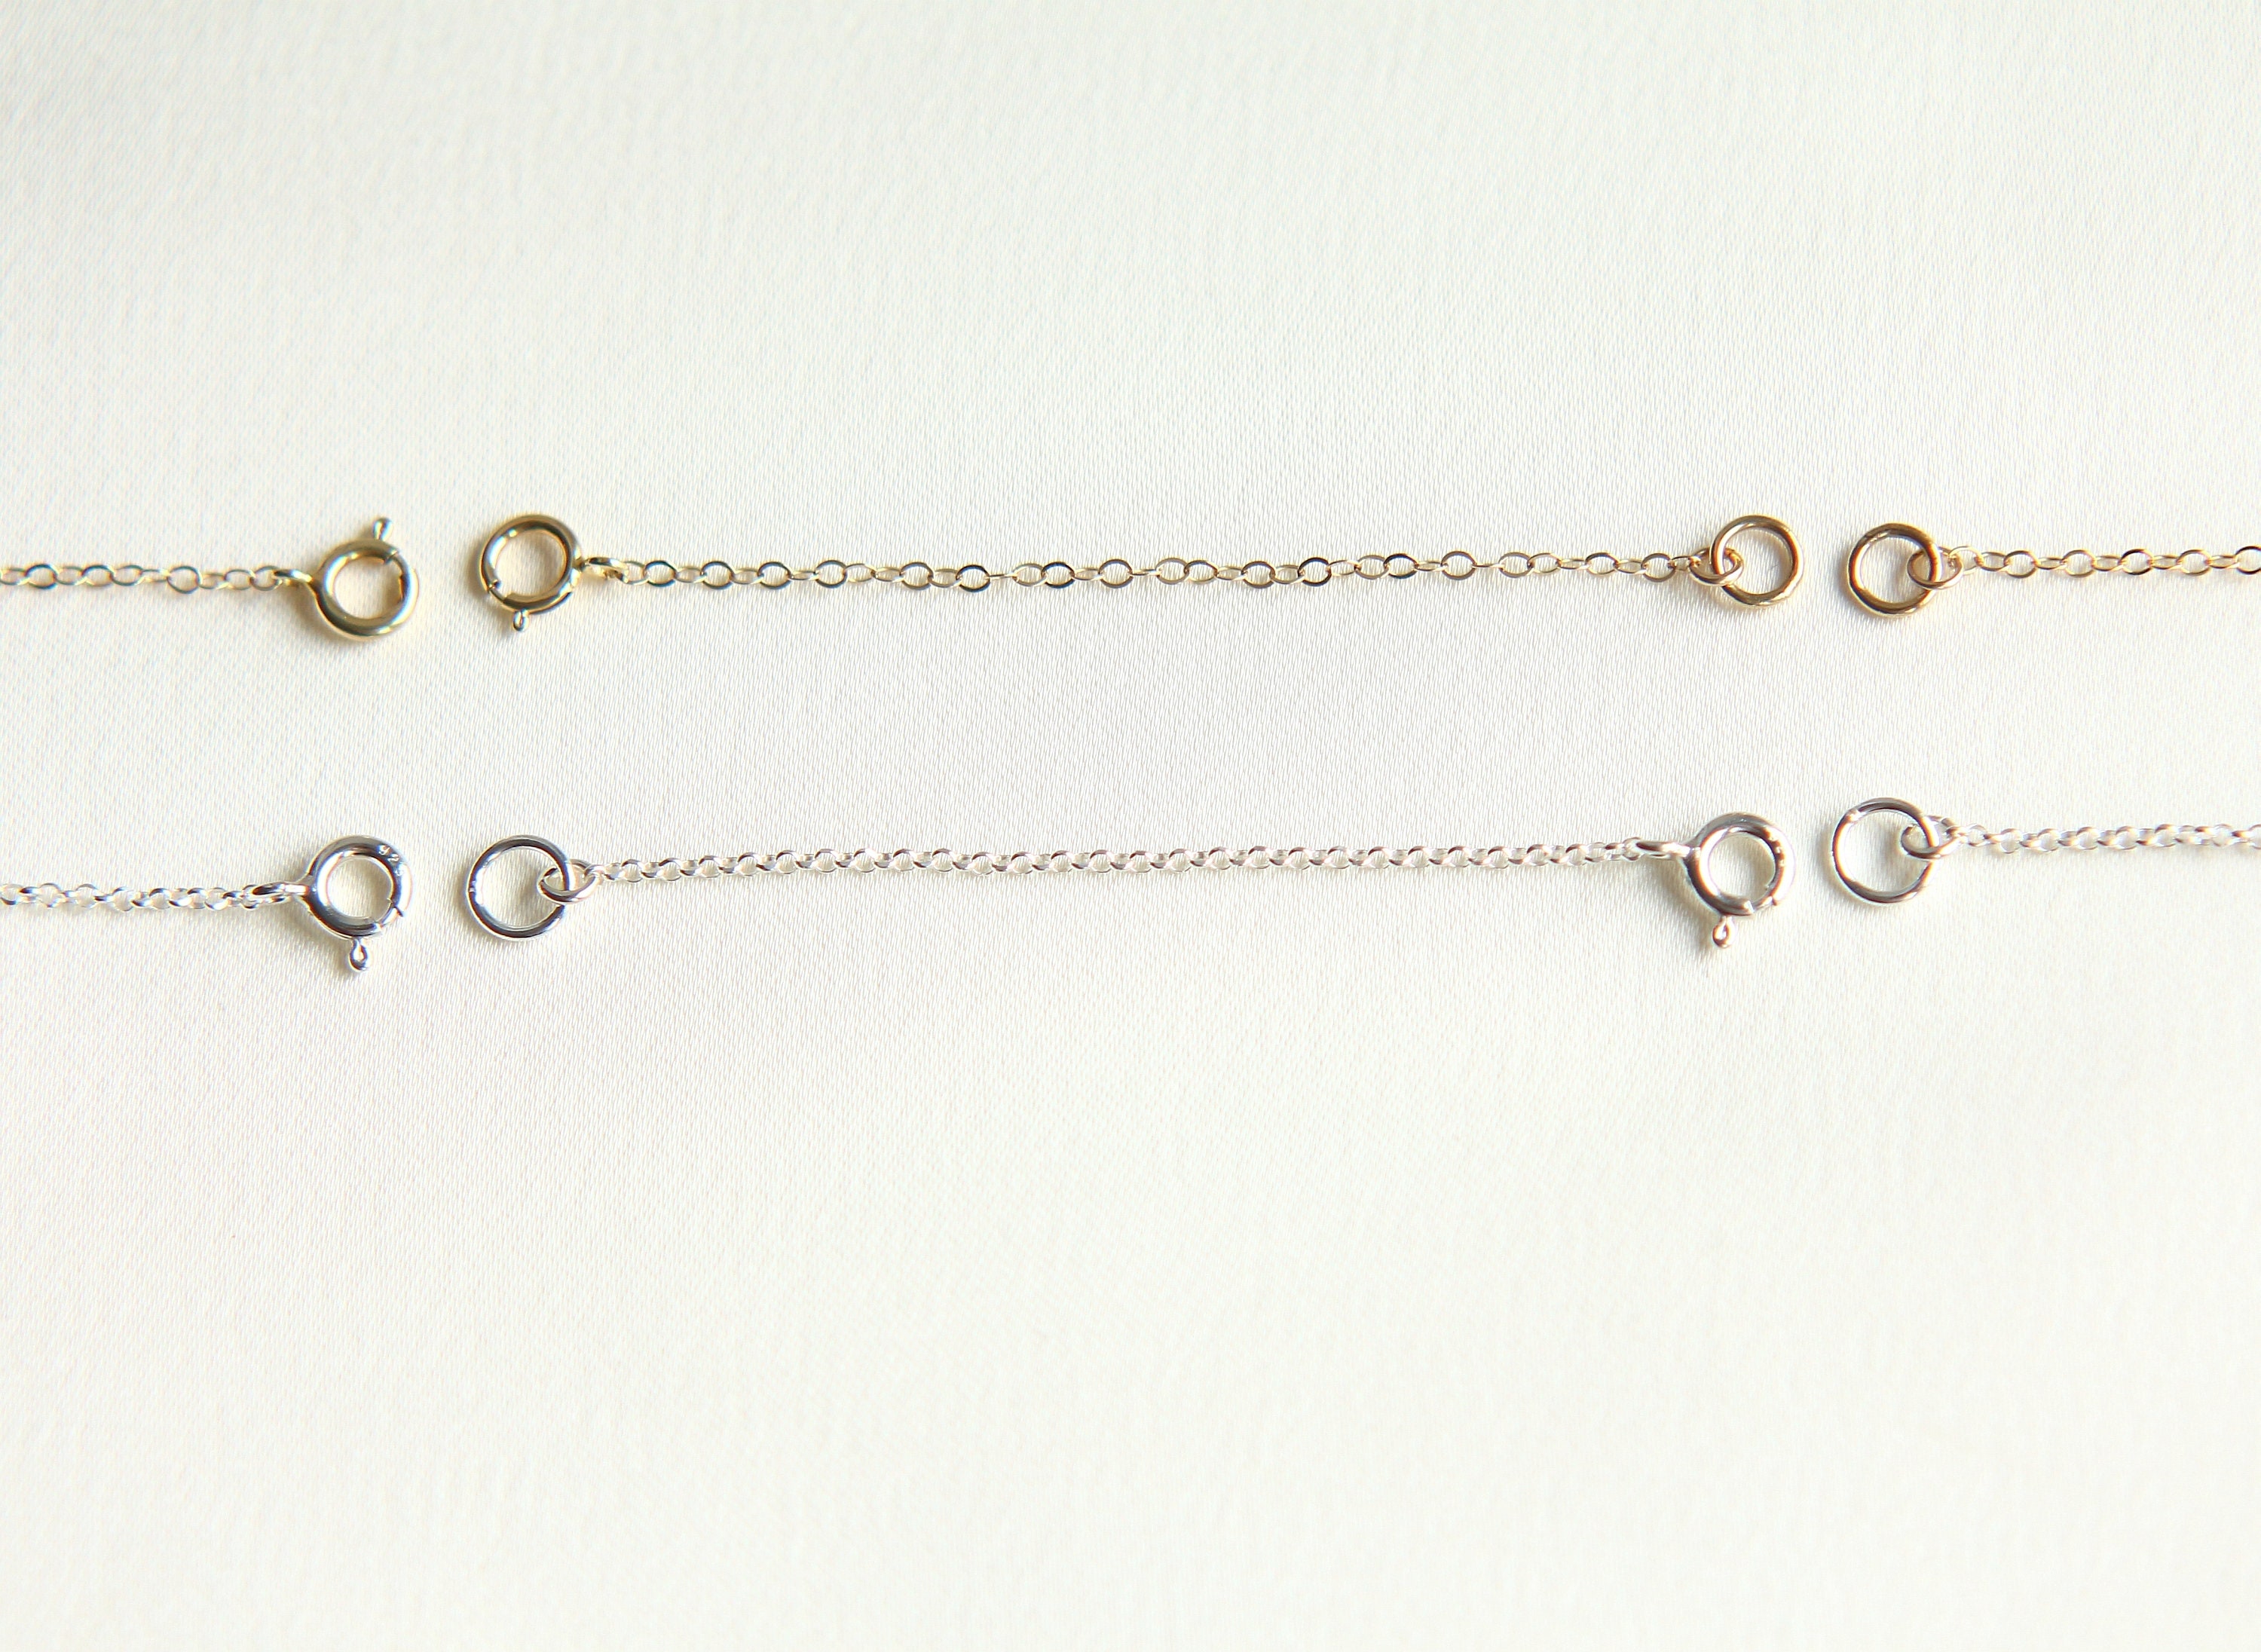 CHAIN EXTENDER - 14k gold filled – Kei Jewelry